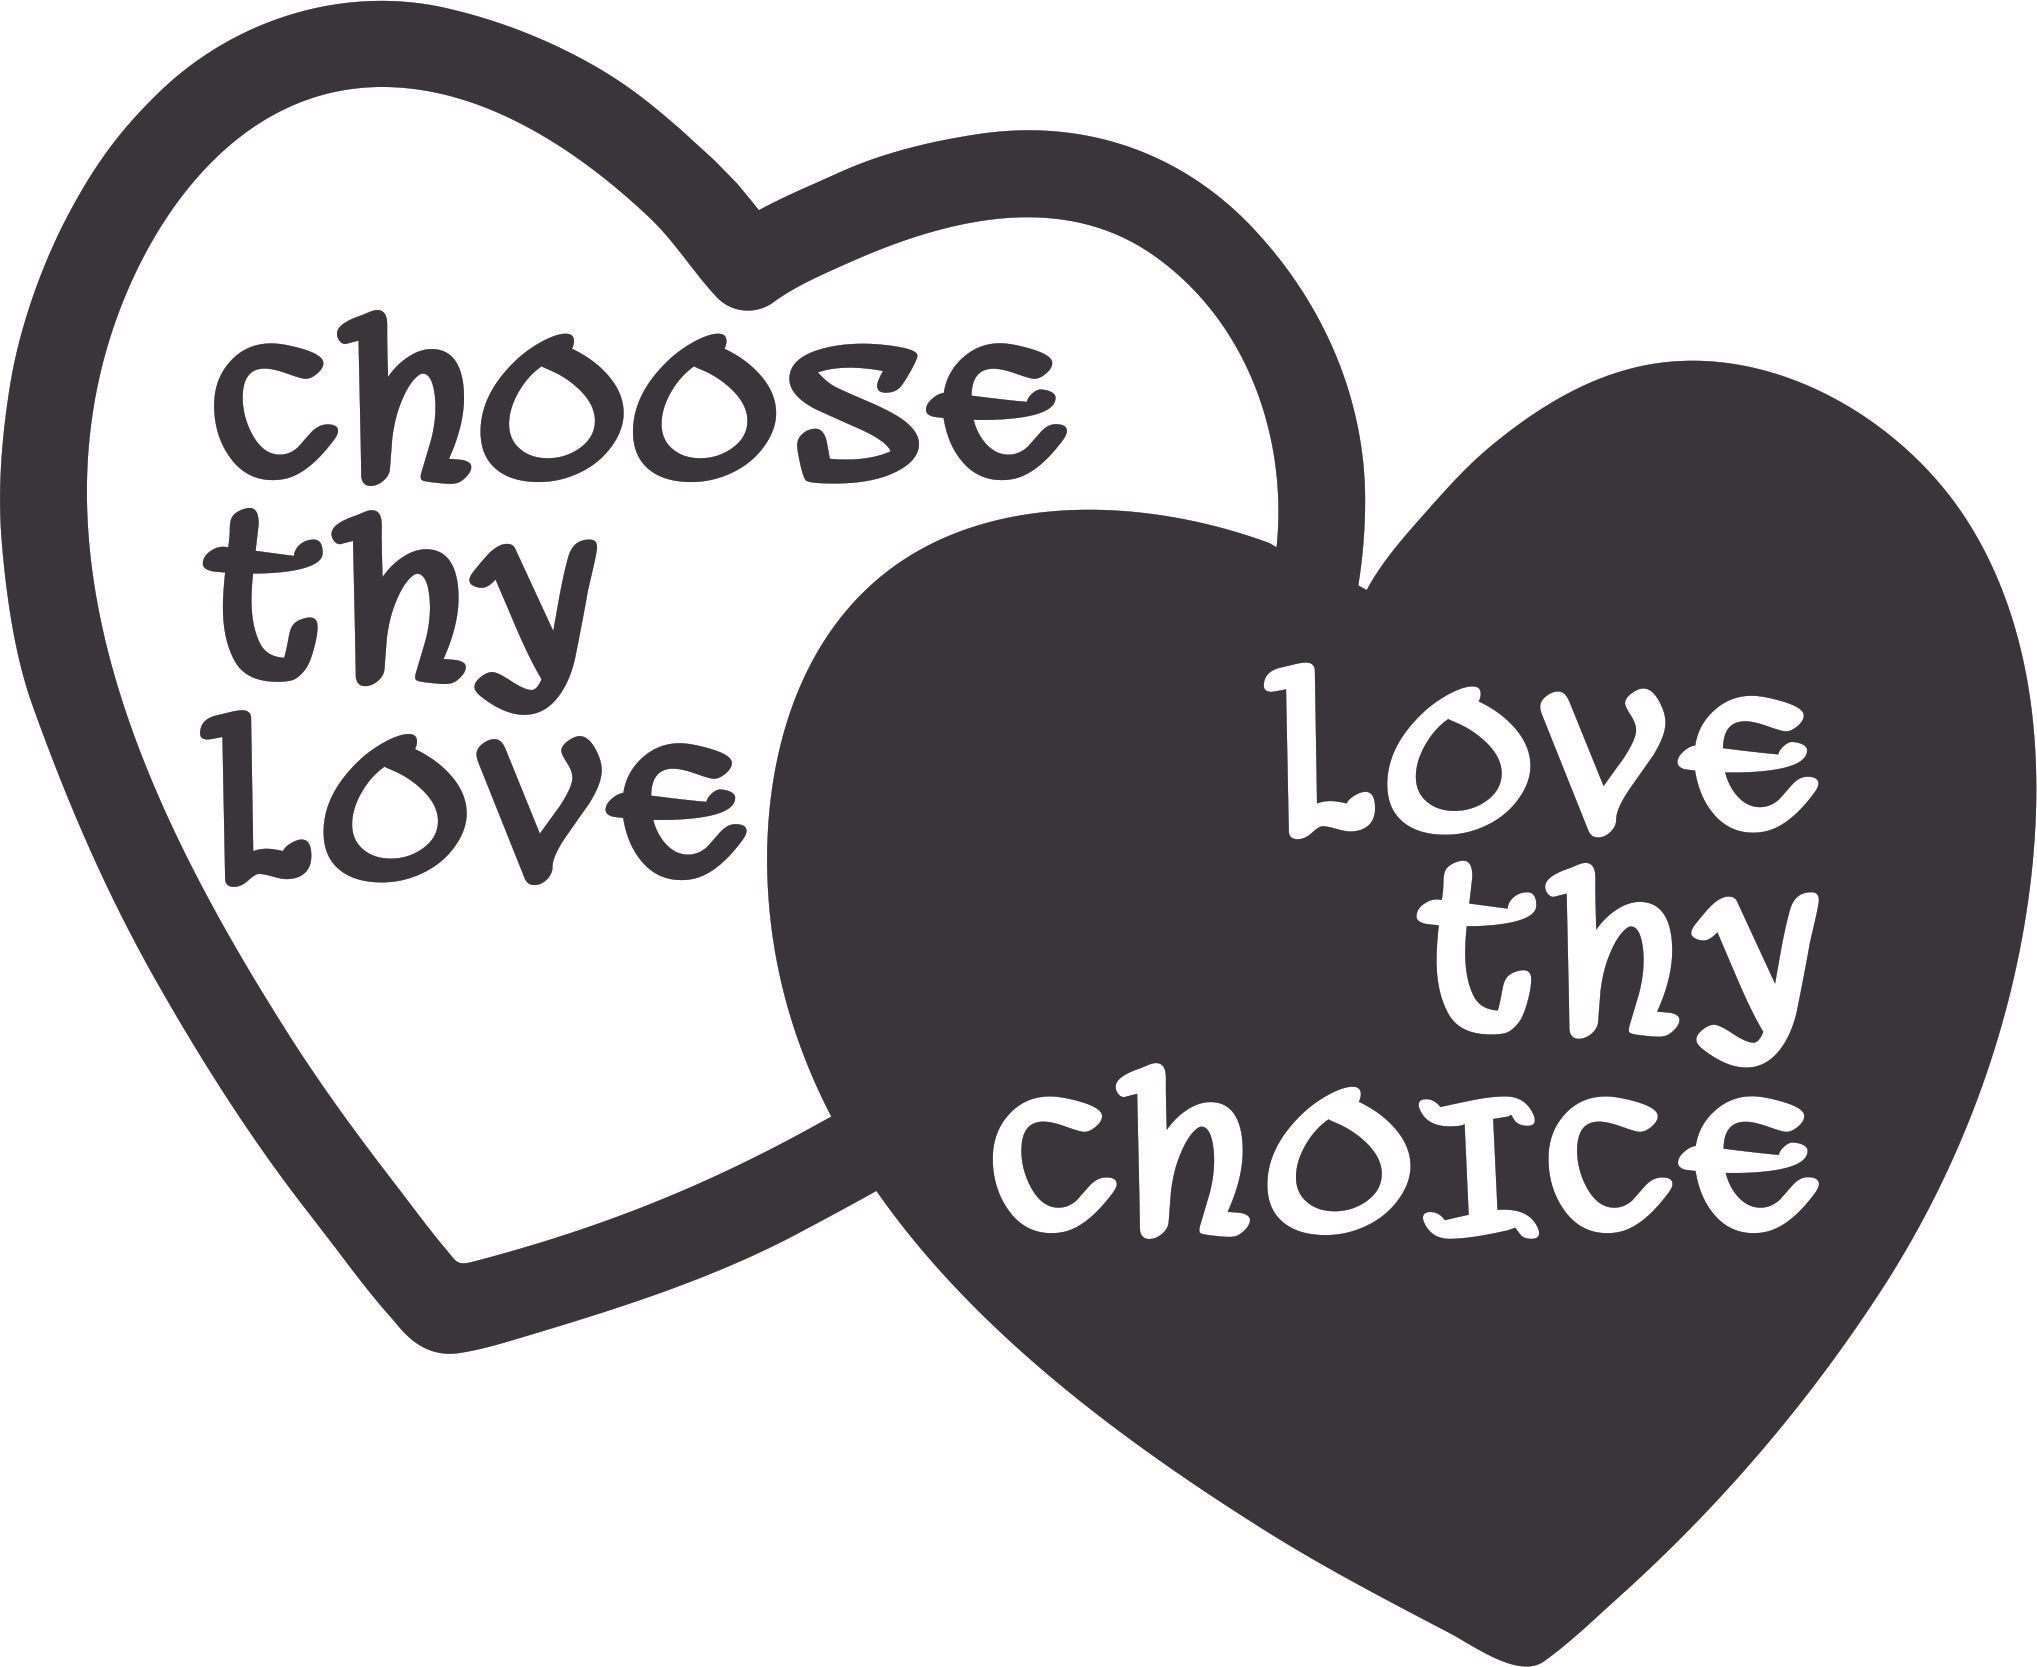 Wall Decal Choose Thy Love Love Thy Choice Hes Love Fondness Devotion  Worship Truely Loved Soul Mate Passion Heart Forever Holiday Gift  Decorating Ideas Sticker Size: 12 Inches X 20 Inches